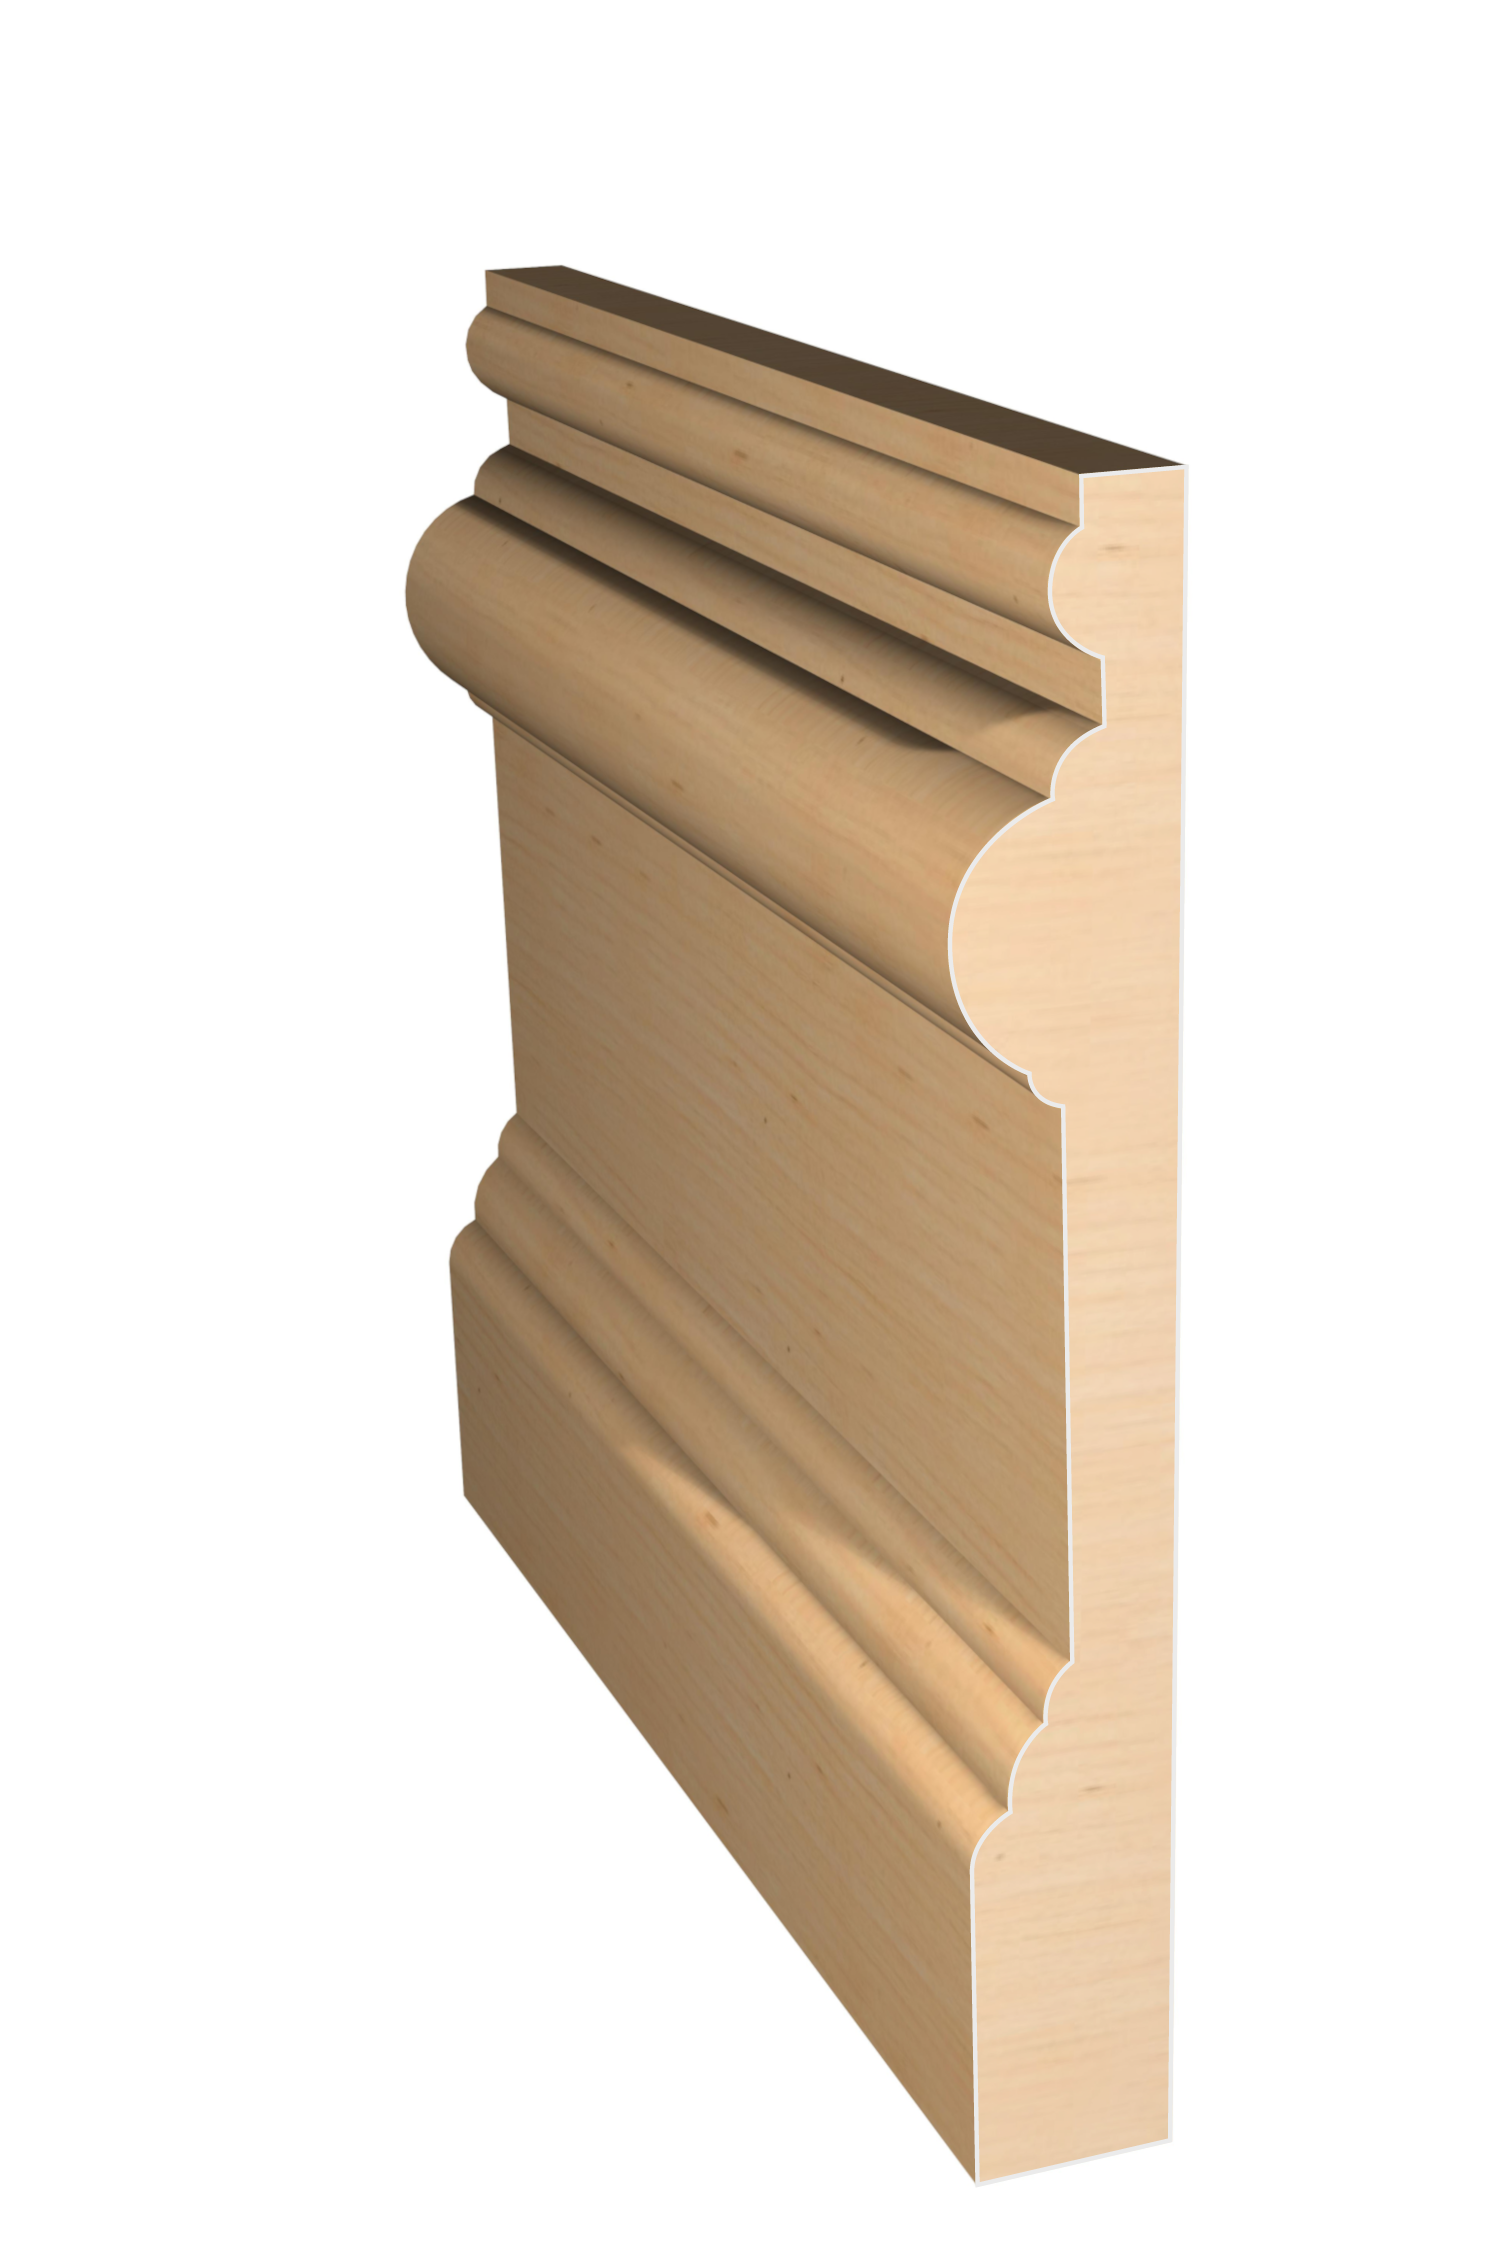 Three dimensional rendering of custom base wood molding BAPL51218 made by Public Lumber Company in Detroit.